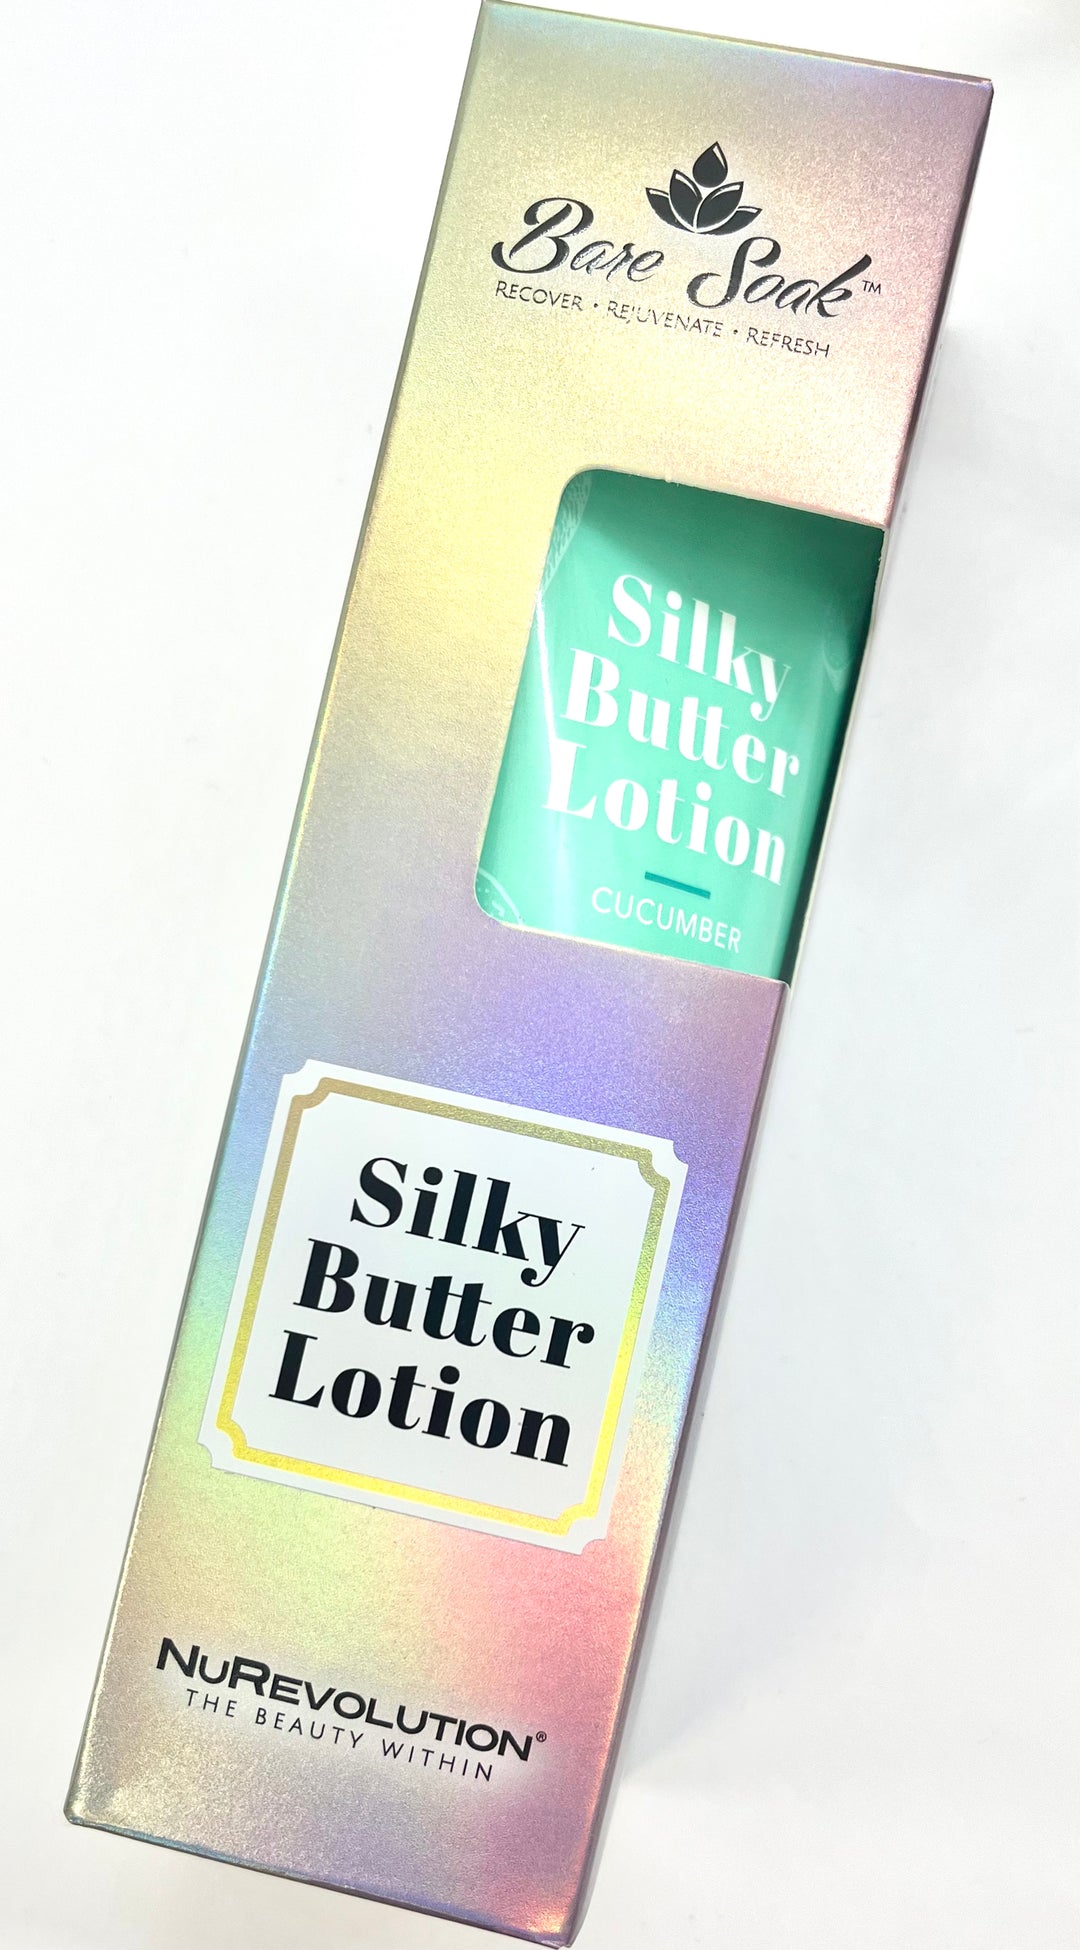 Cucumber Scented - Bare Soak, Silky Butter Lotion